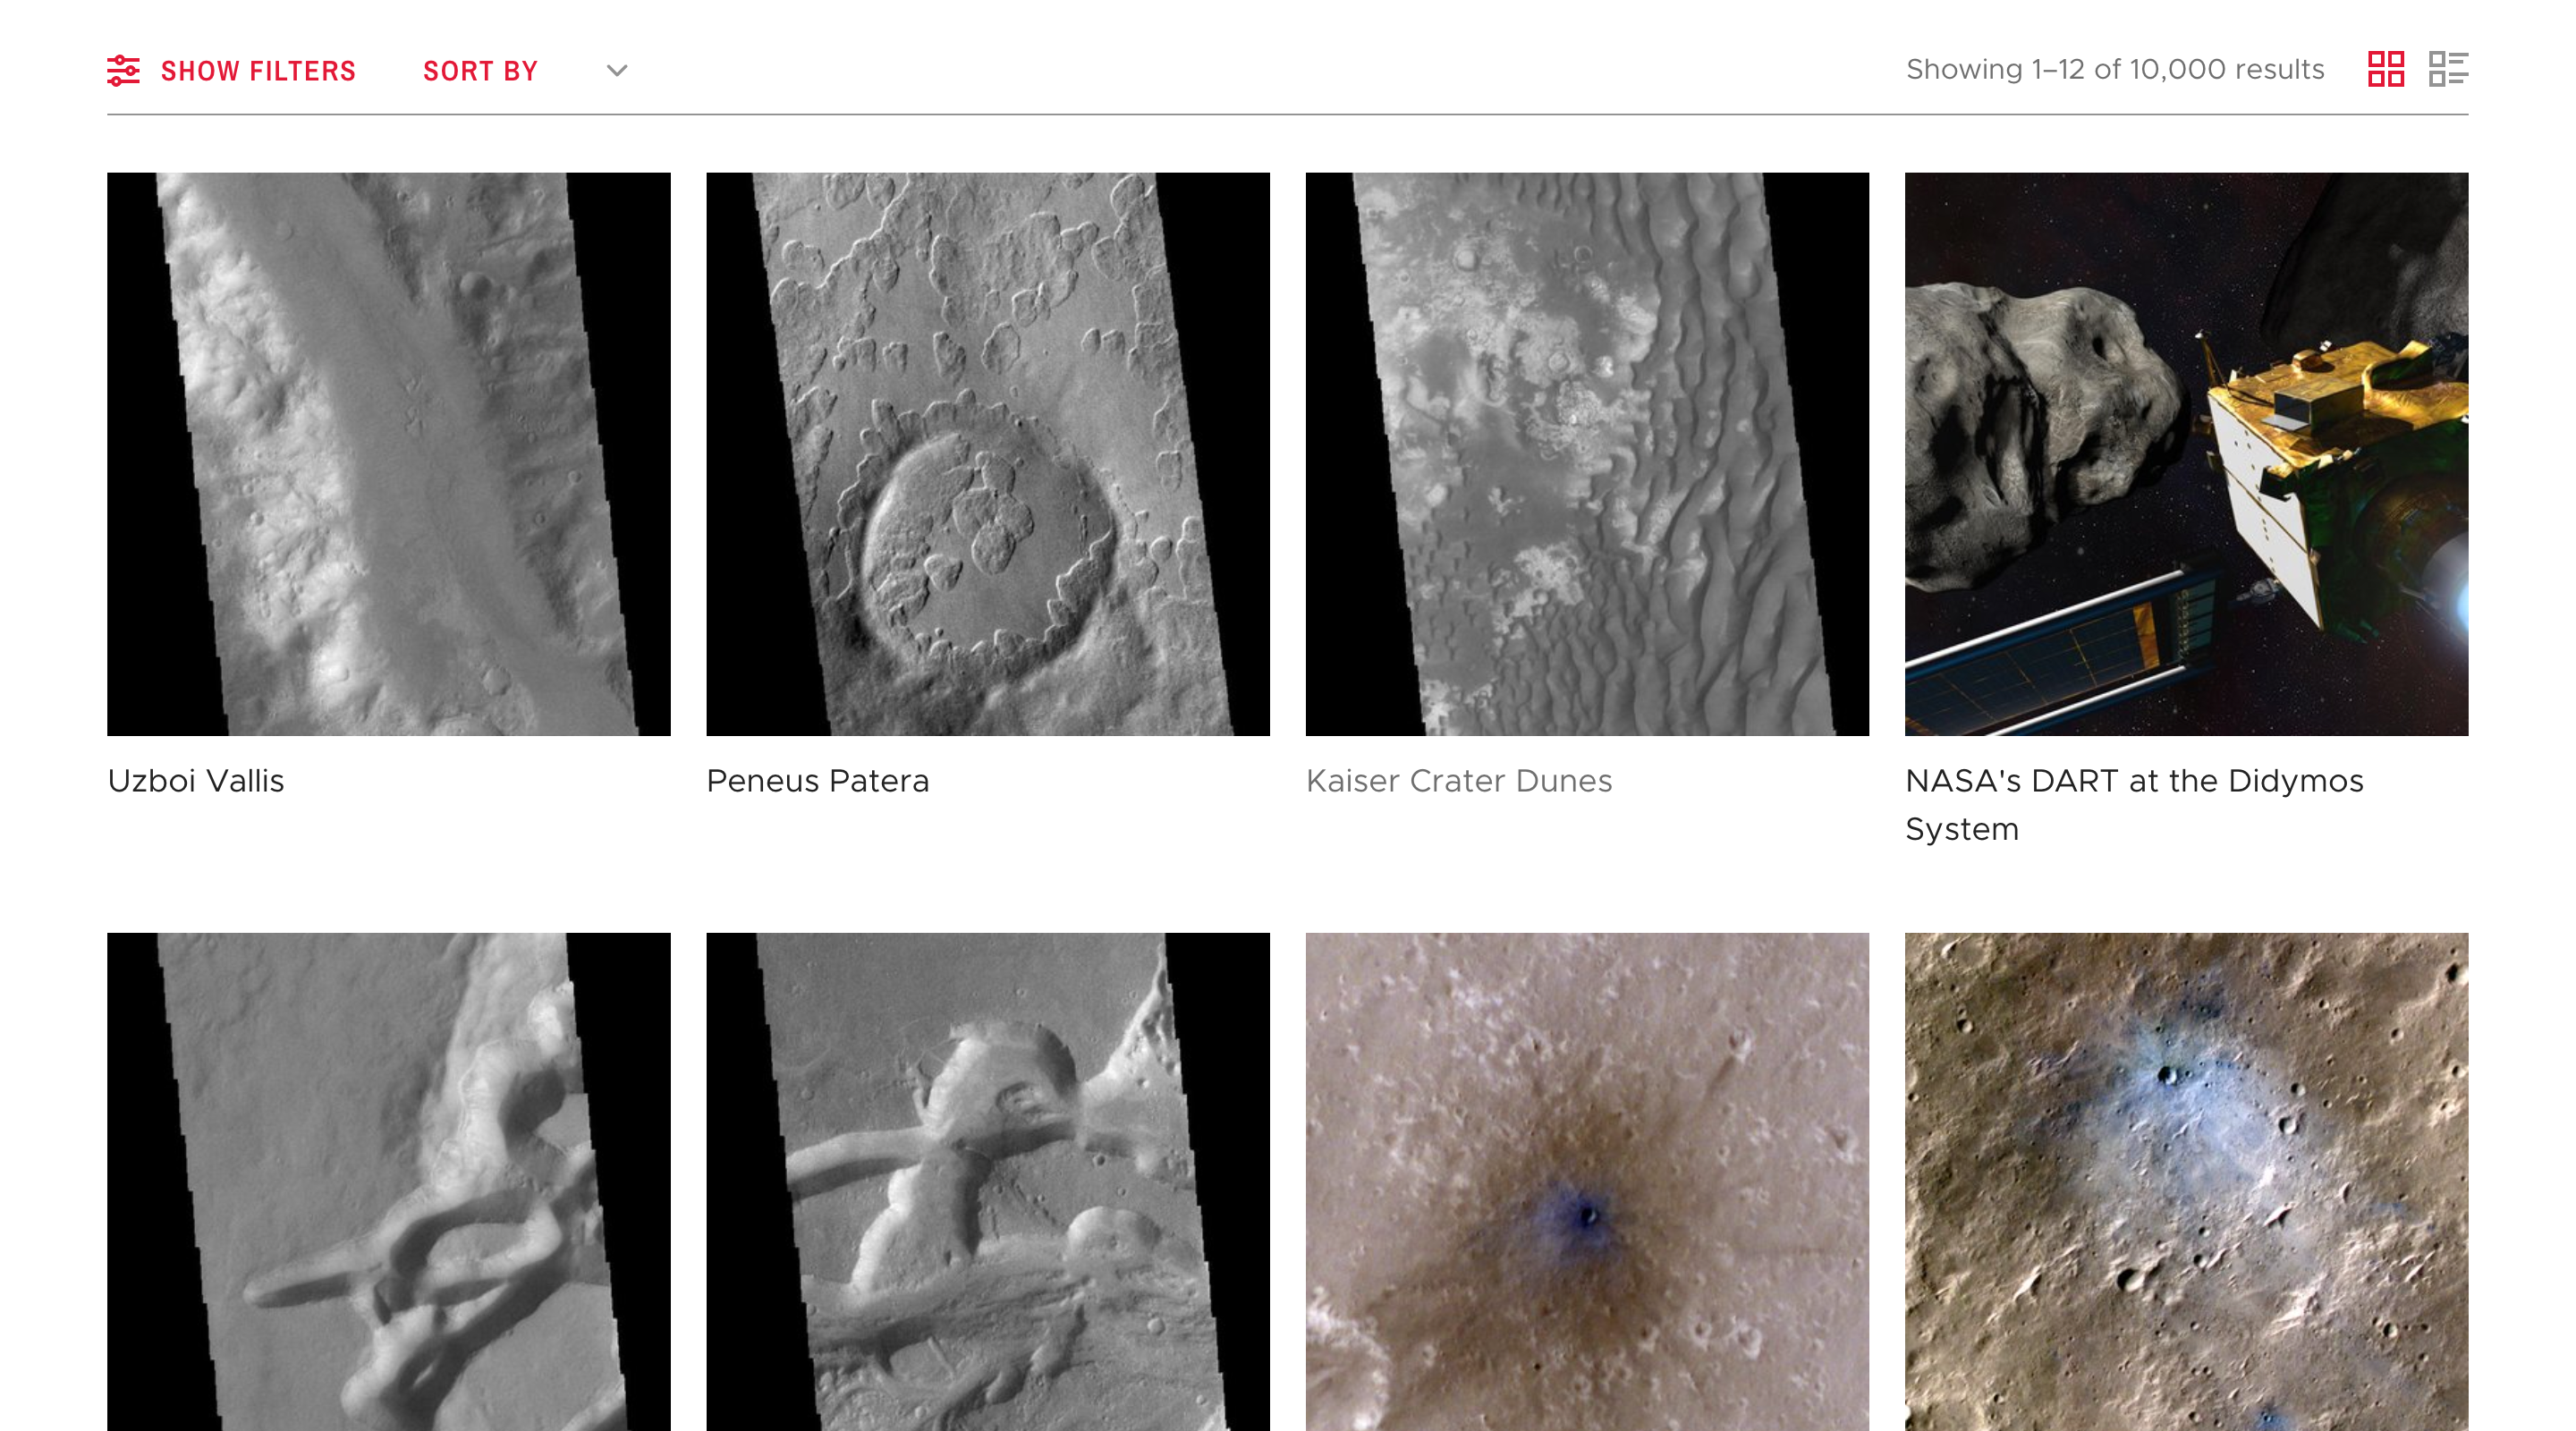 Screenshot of the 'Image Gallery' page of the NASA Jet Propulsion Laboratory website. Images are displayed in a grid with four columns, and there are buttons above to filter or sort the results.